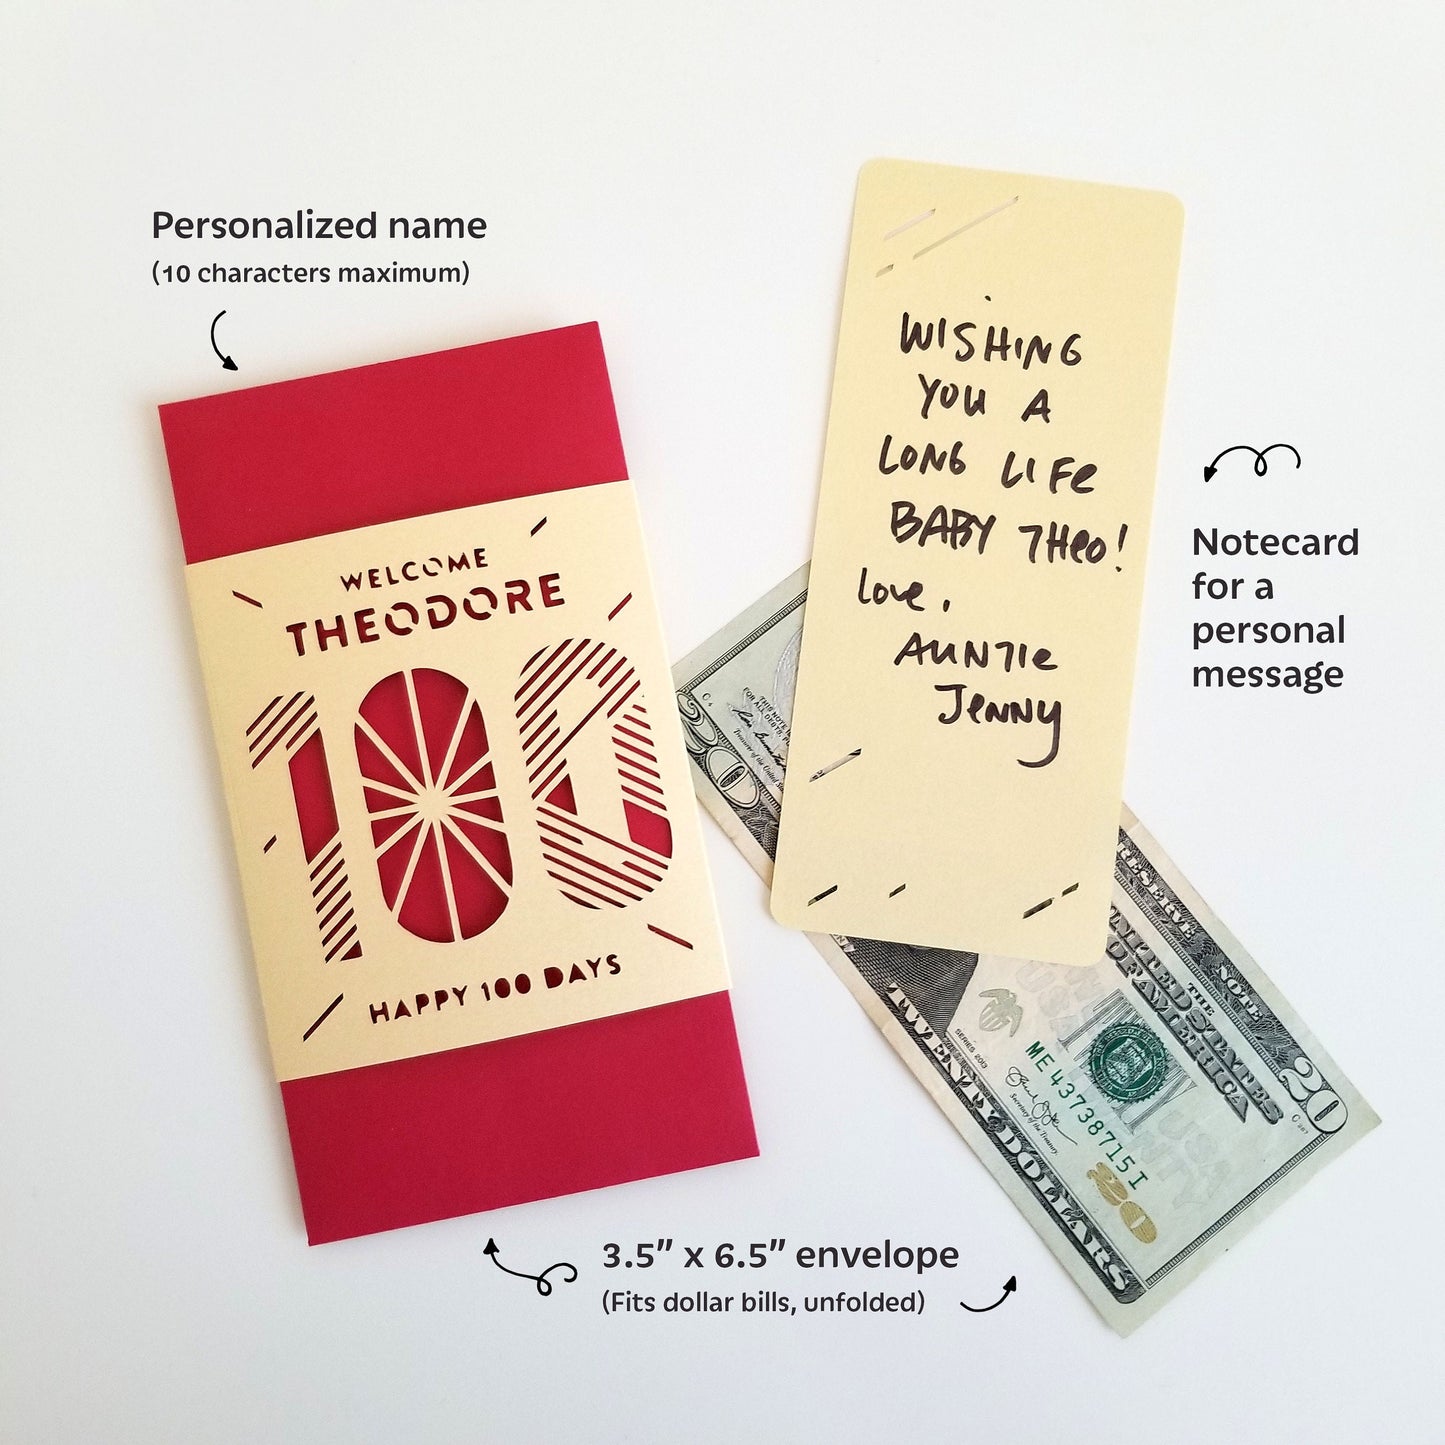 100 Days Red Envelope, personalized